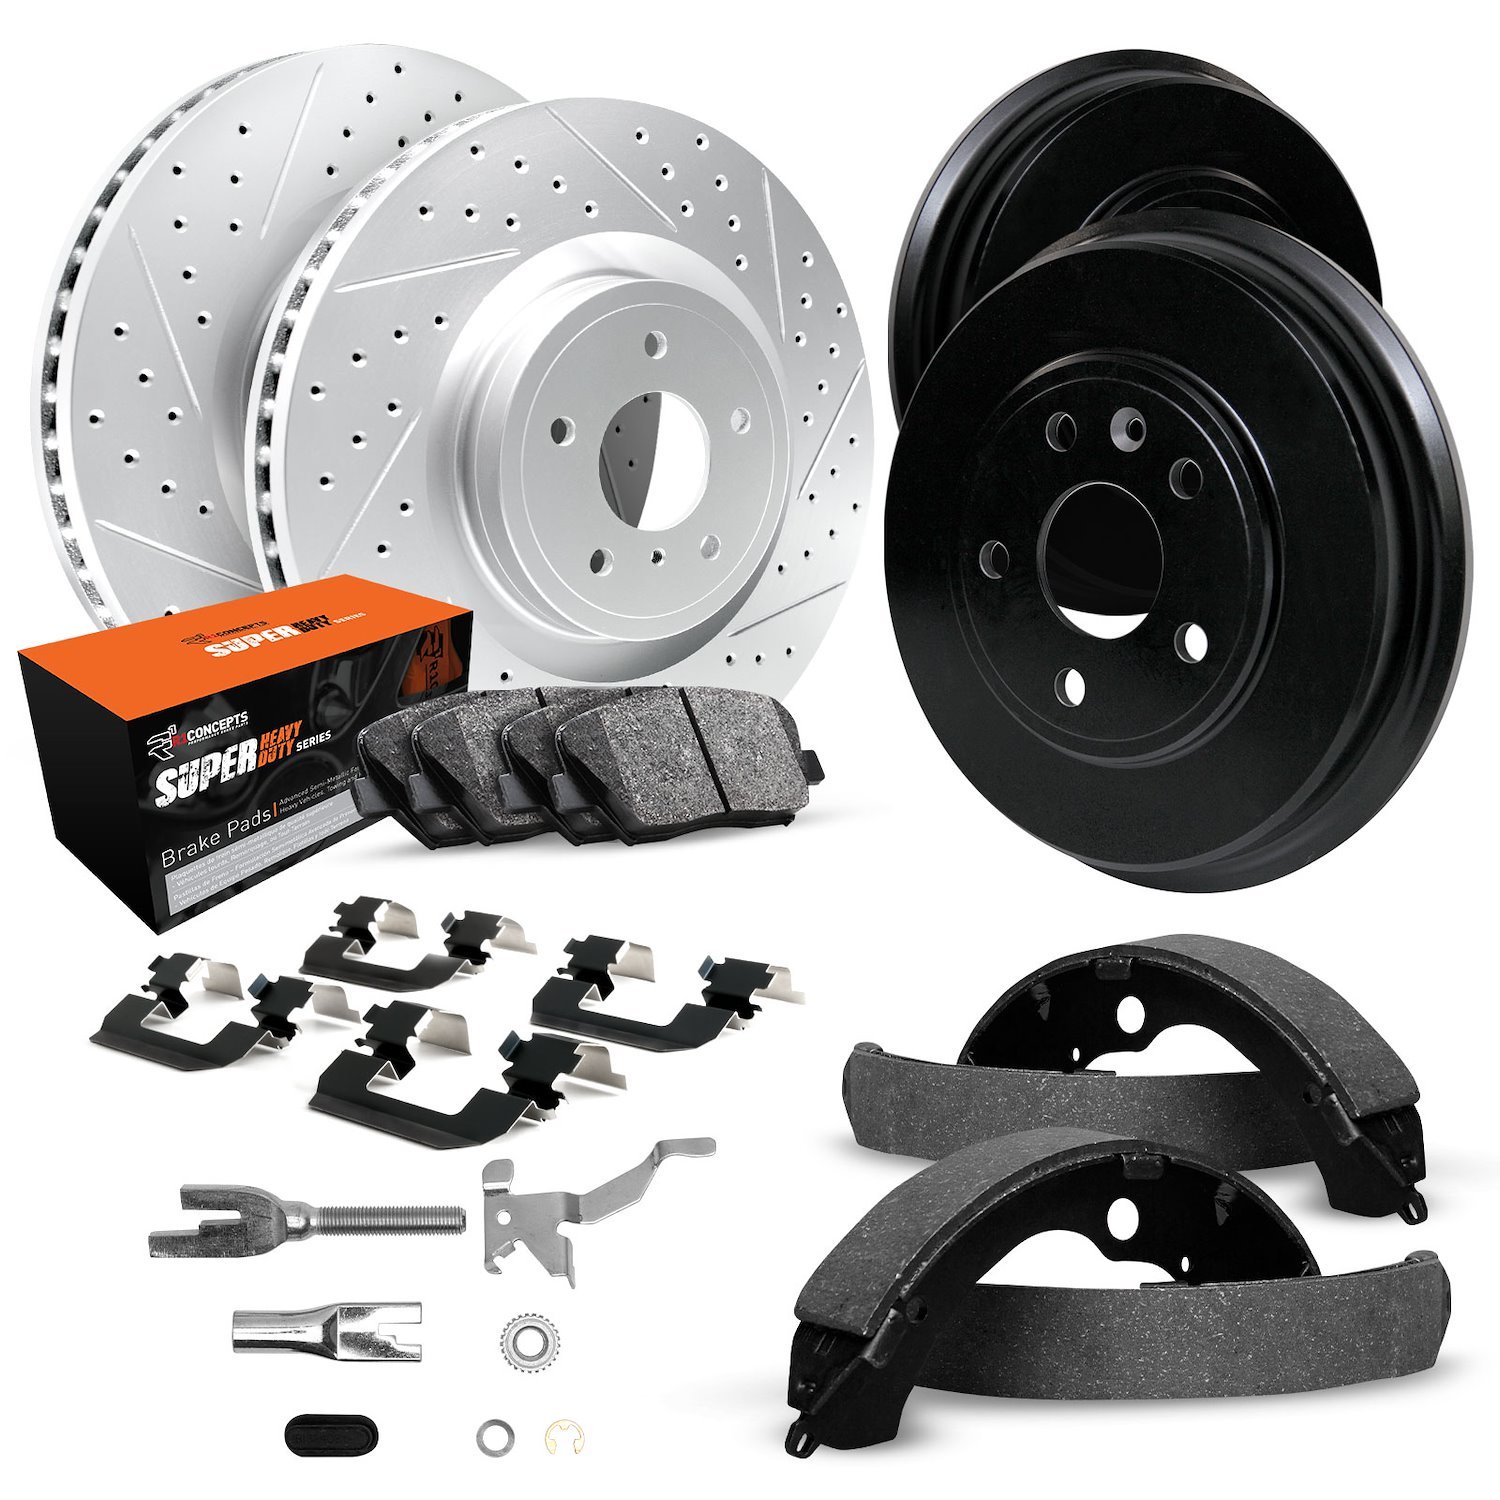 GEO-Carbon Drilled/Slotted Rotors/Drums w/Super-Duty Pads/Shoes/Hardware/Adjusters, 1998-1999 Mopar, Position: Front/Rear